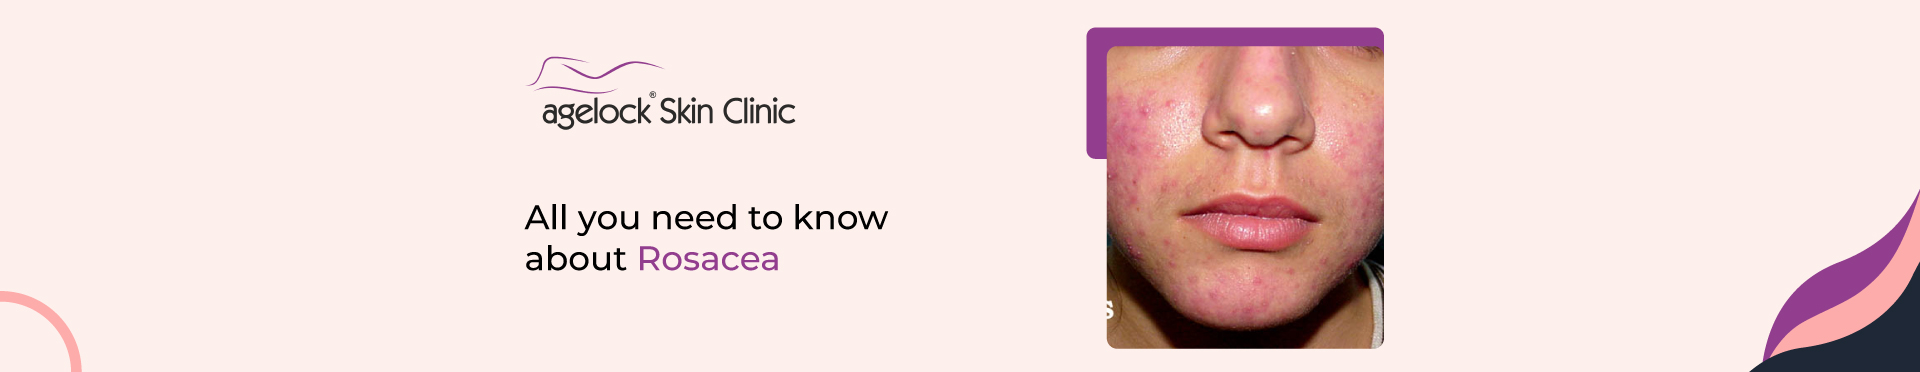 <strong>All you need to know about Rosacea: Symptoms, causes, and treatment</strong>